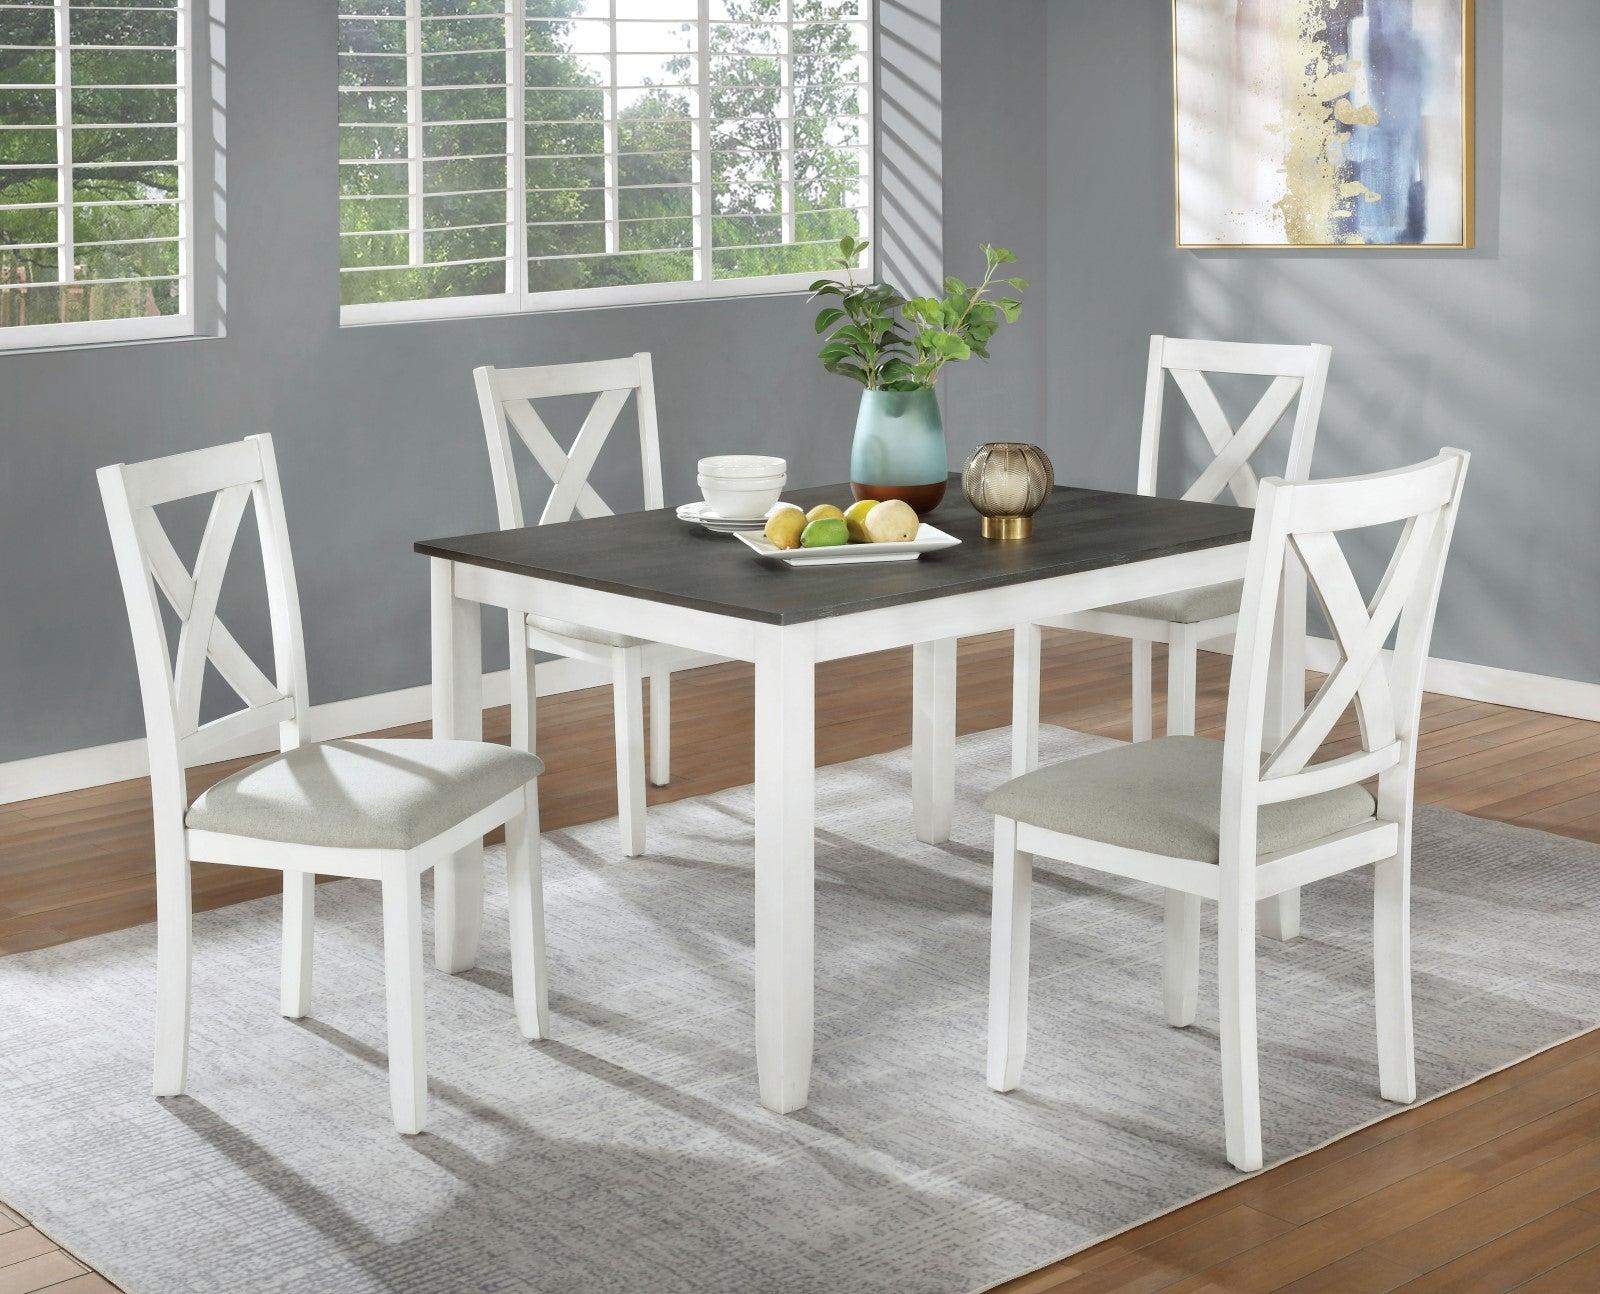 Rustic Dining Table Set CM3476WH-T-5PK Anya CM3476WH-T-5PK in White, Gray Fabric